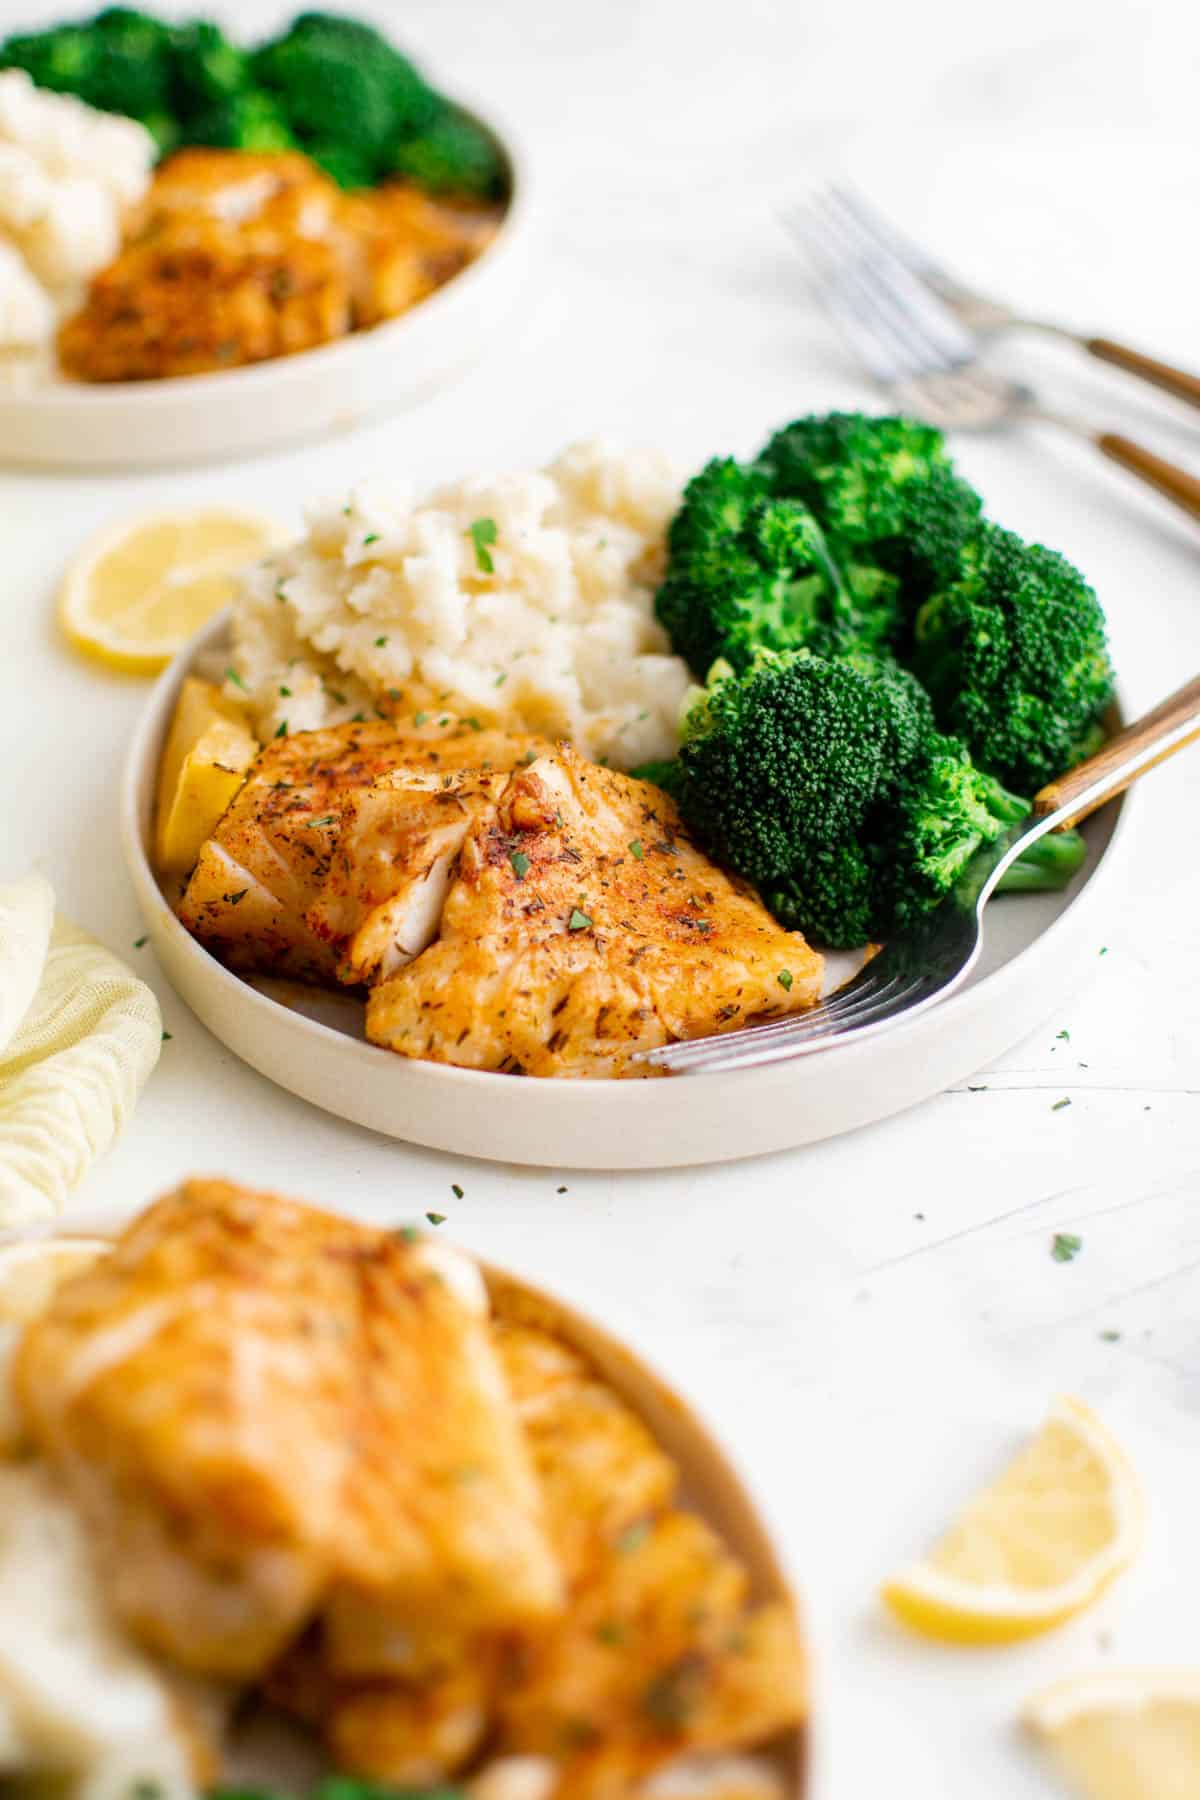 pan fried cod on a plate with mashed potatoes and broccoli